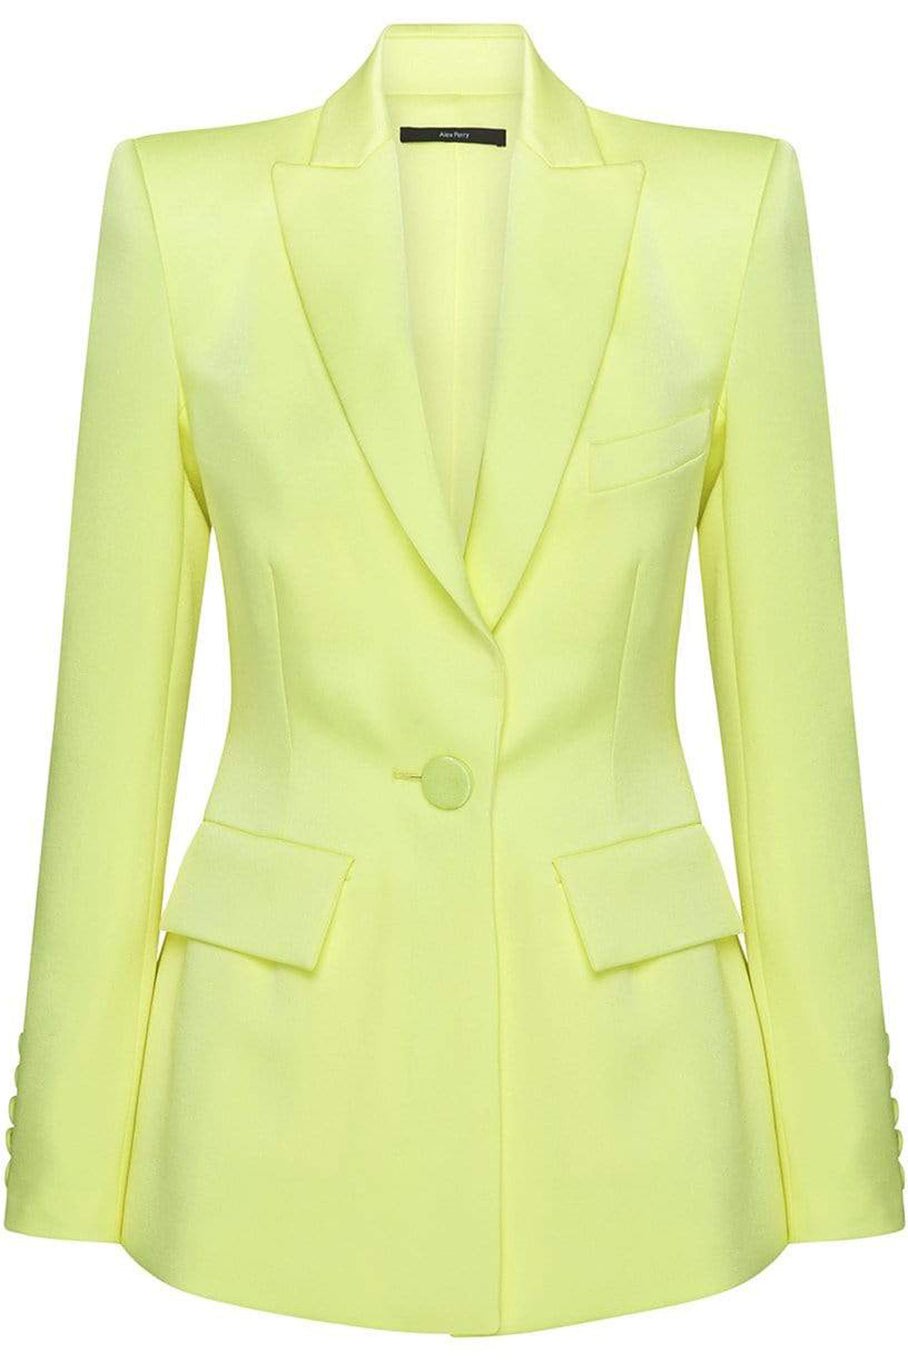 ALEX PERRY-Manon Fitted Blazer-